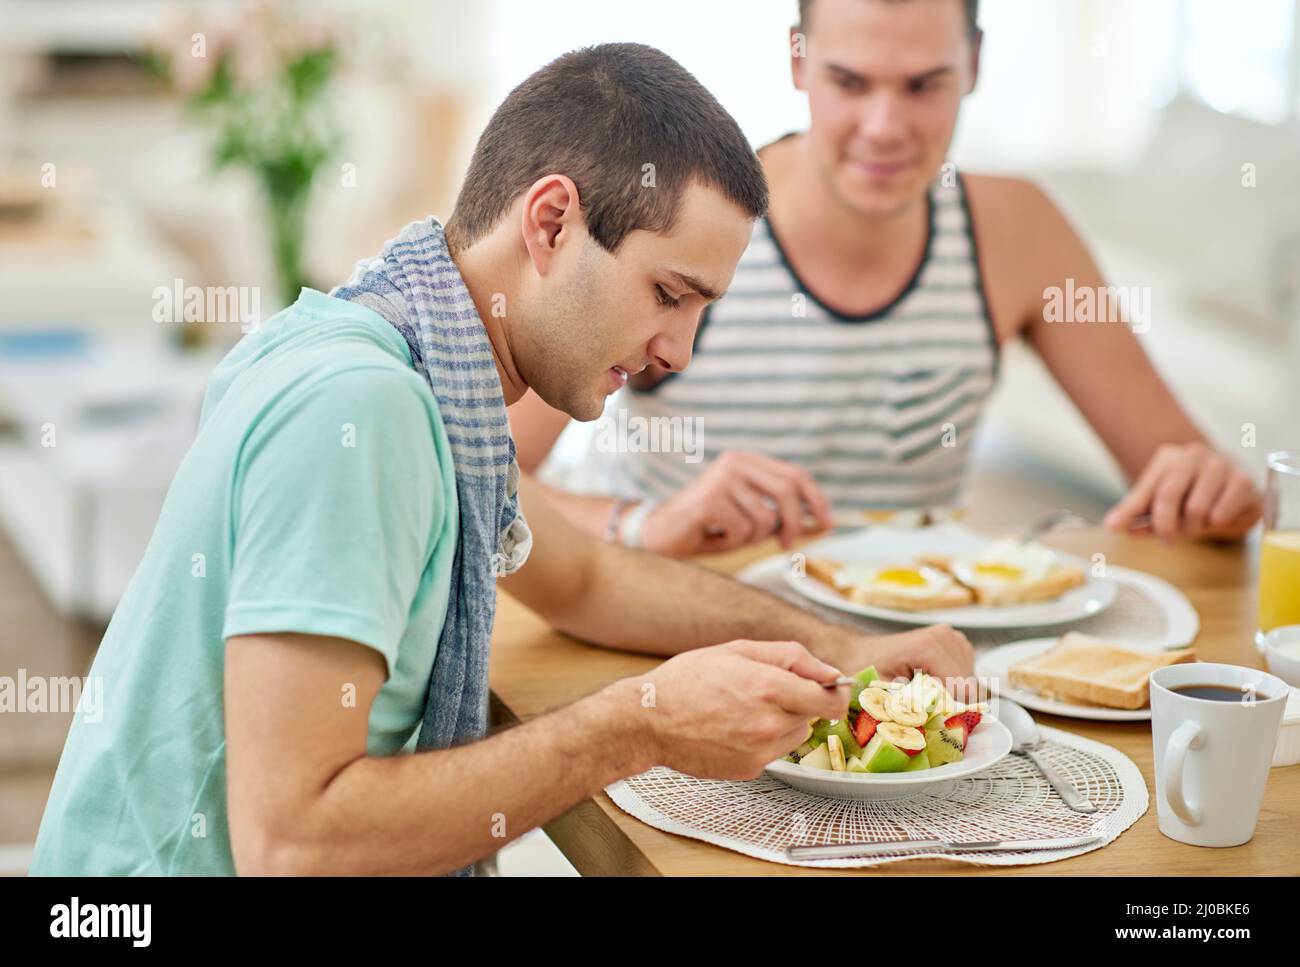 Enjoying a good meal and each others company. Shot of a gay couple having lunch together. Stock Photo